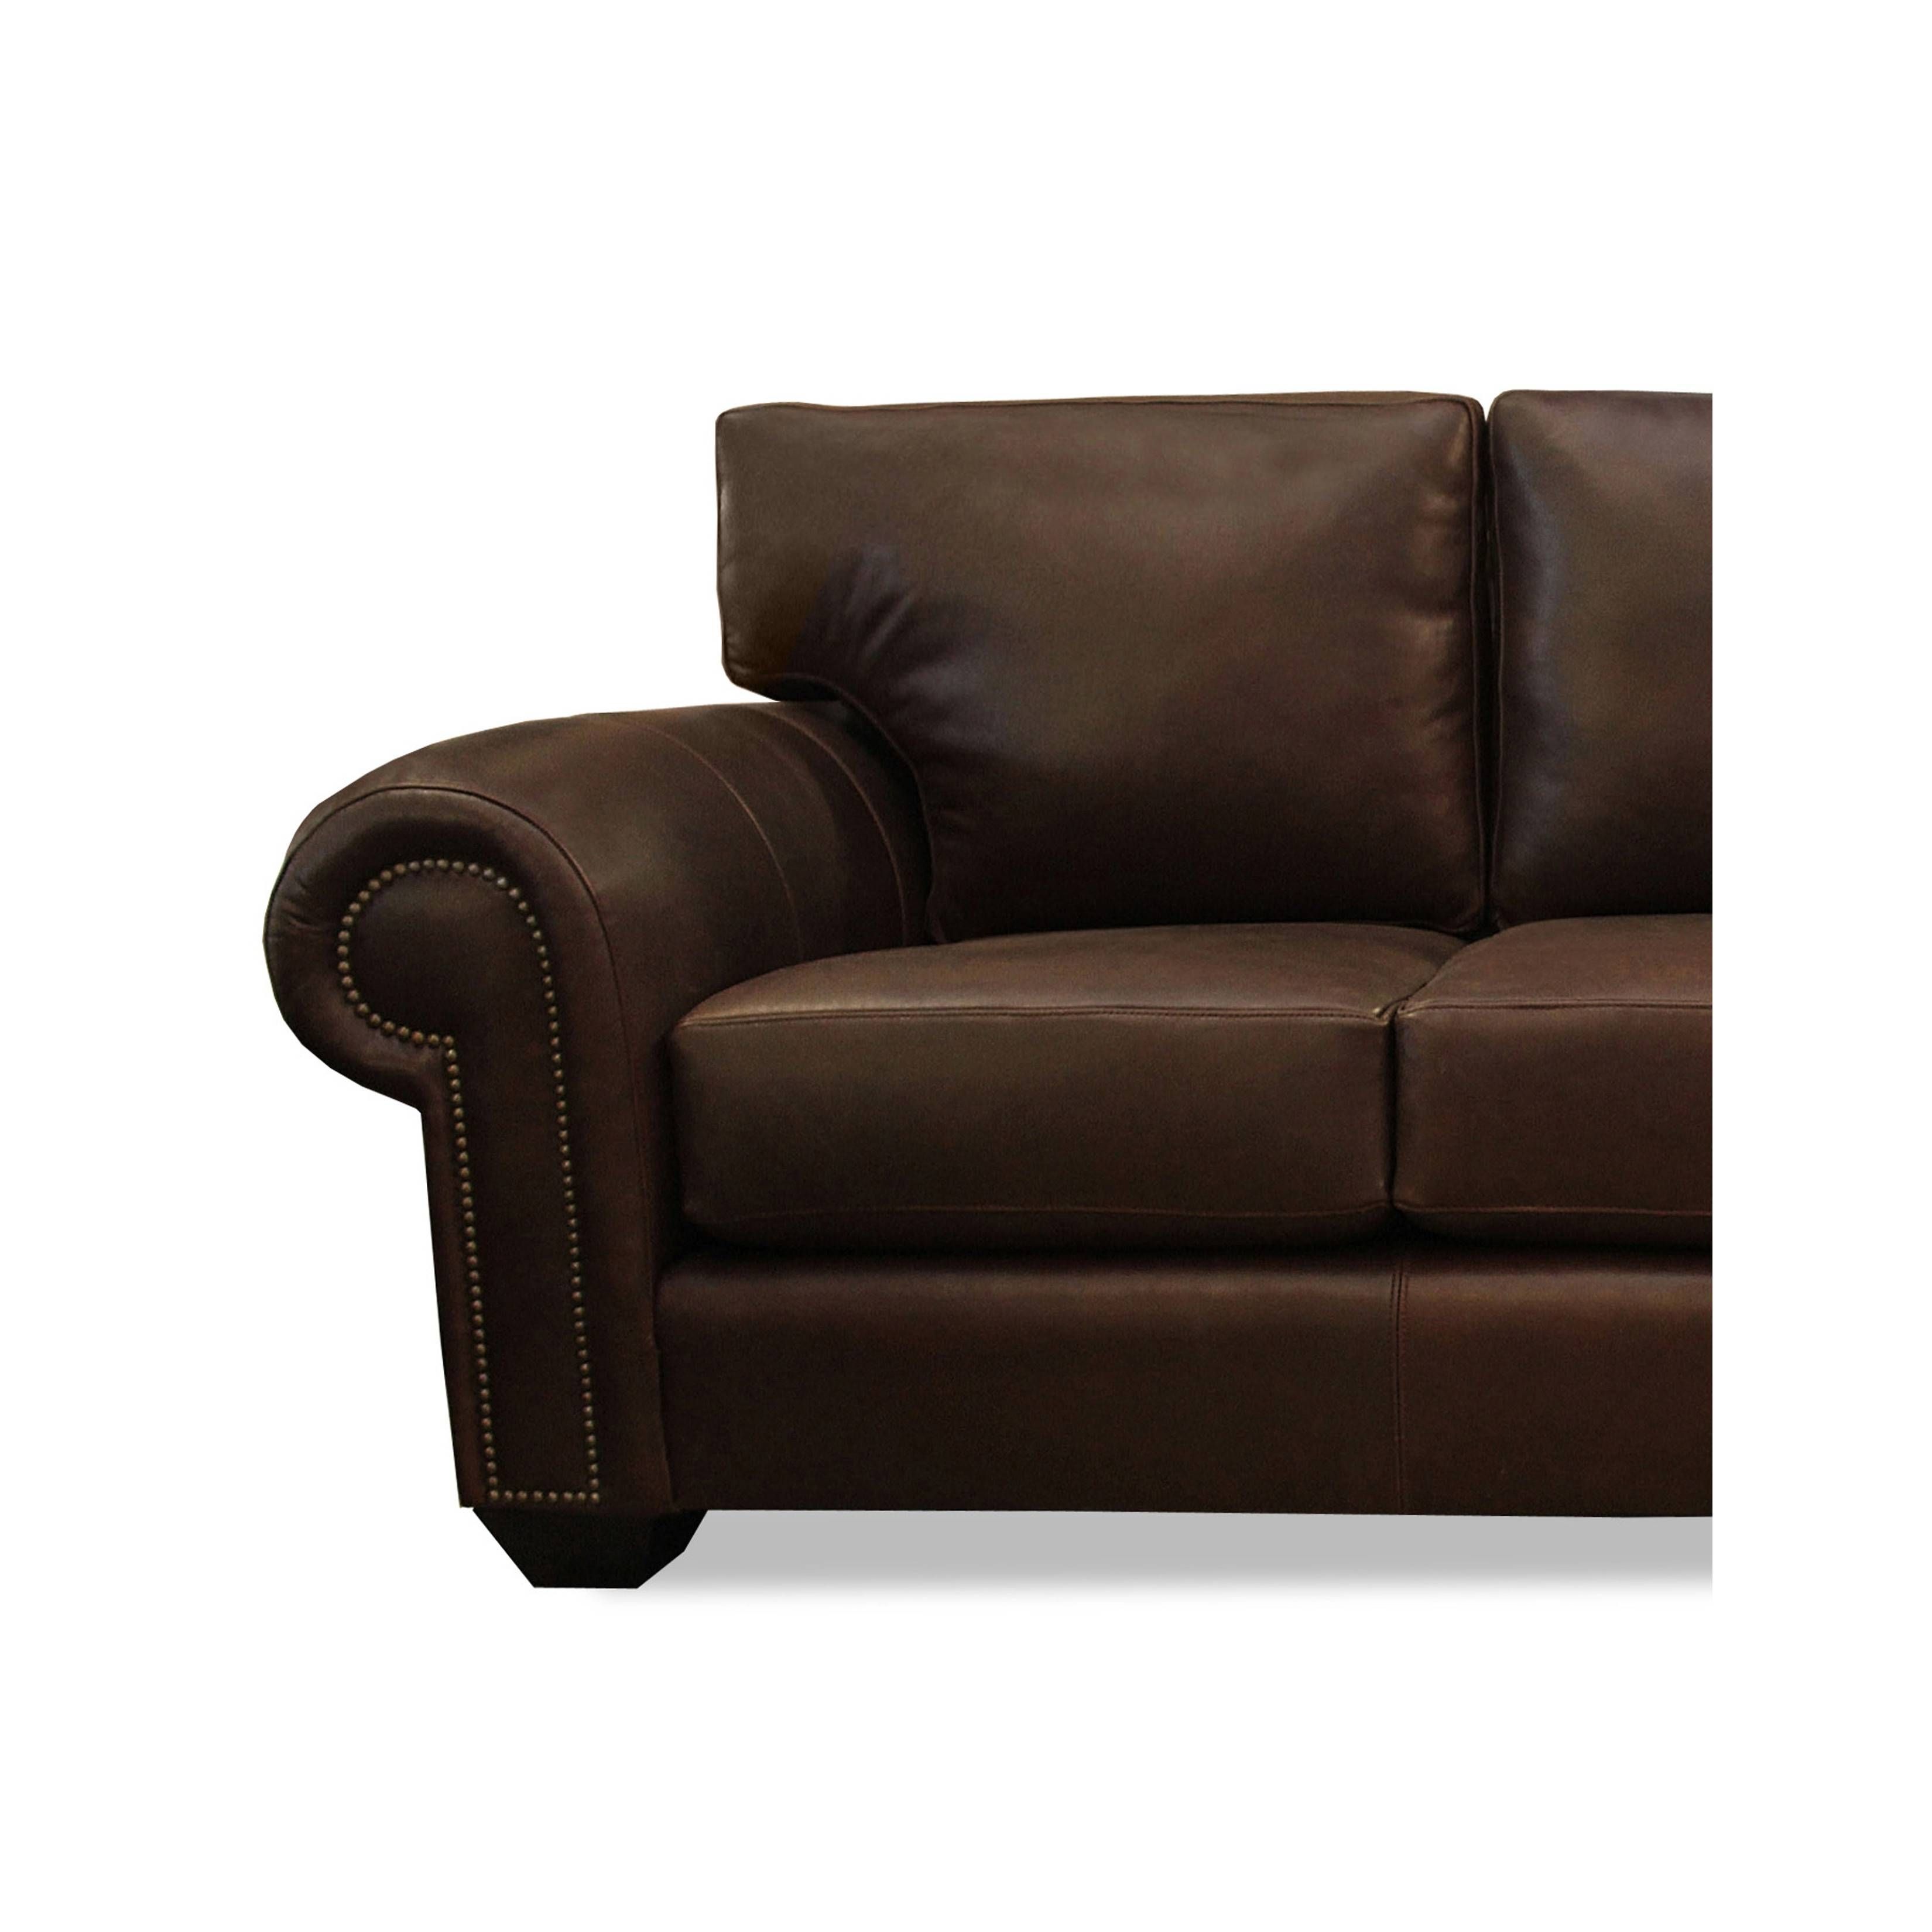 Sofas Manchester Uk | Goodca Sofa In Manchester Sofas (View 8 of 30)